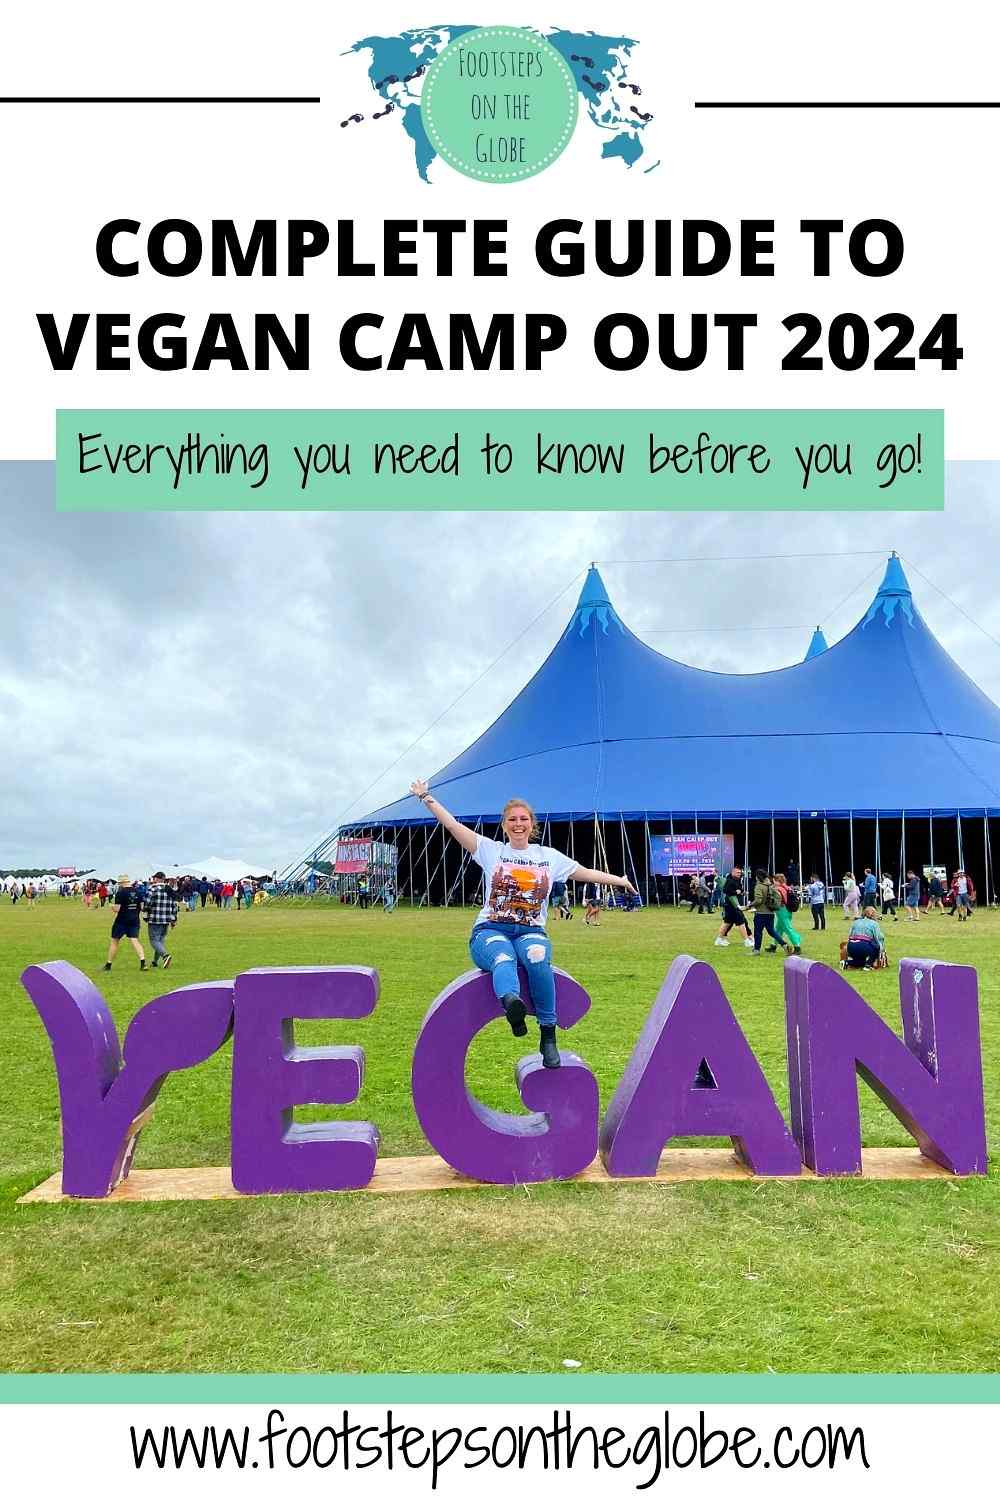 Pinterest image of Mel sat on the "G" on the "Vegan" sign at Vegan Camp Out with her arms out and the text: "Complete Guide to Vegan Camp Out 2024 - everything you need to know before you go!"